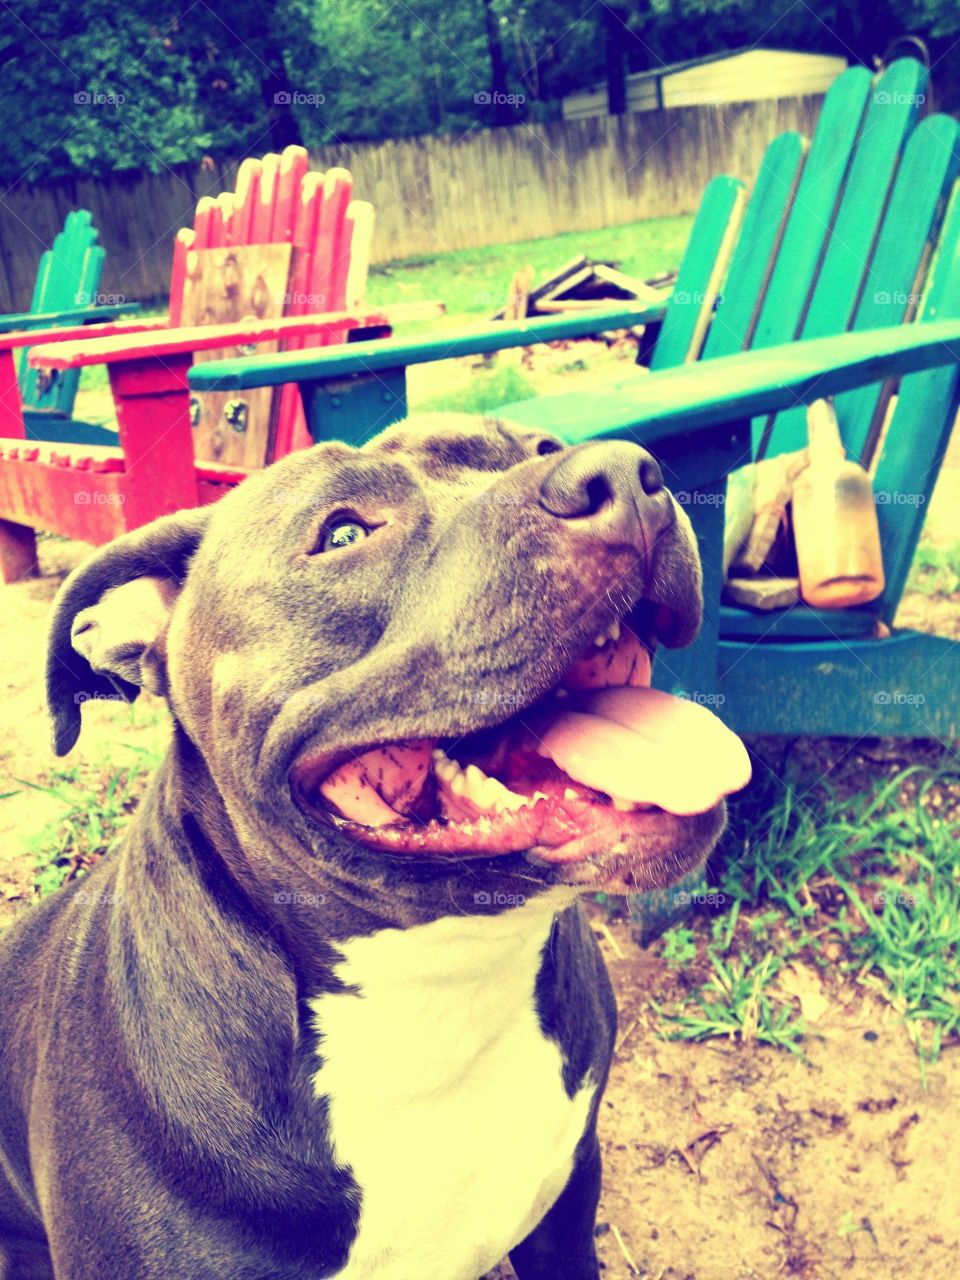 My pitbull, Anubis, smiling in our messy backyard.